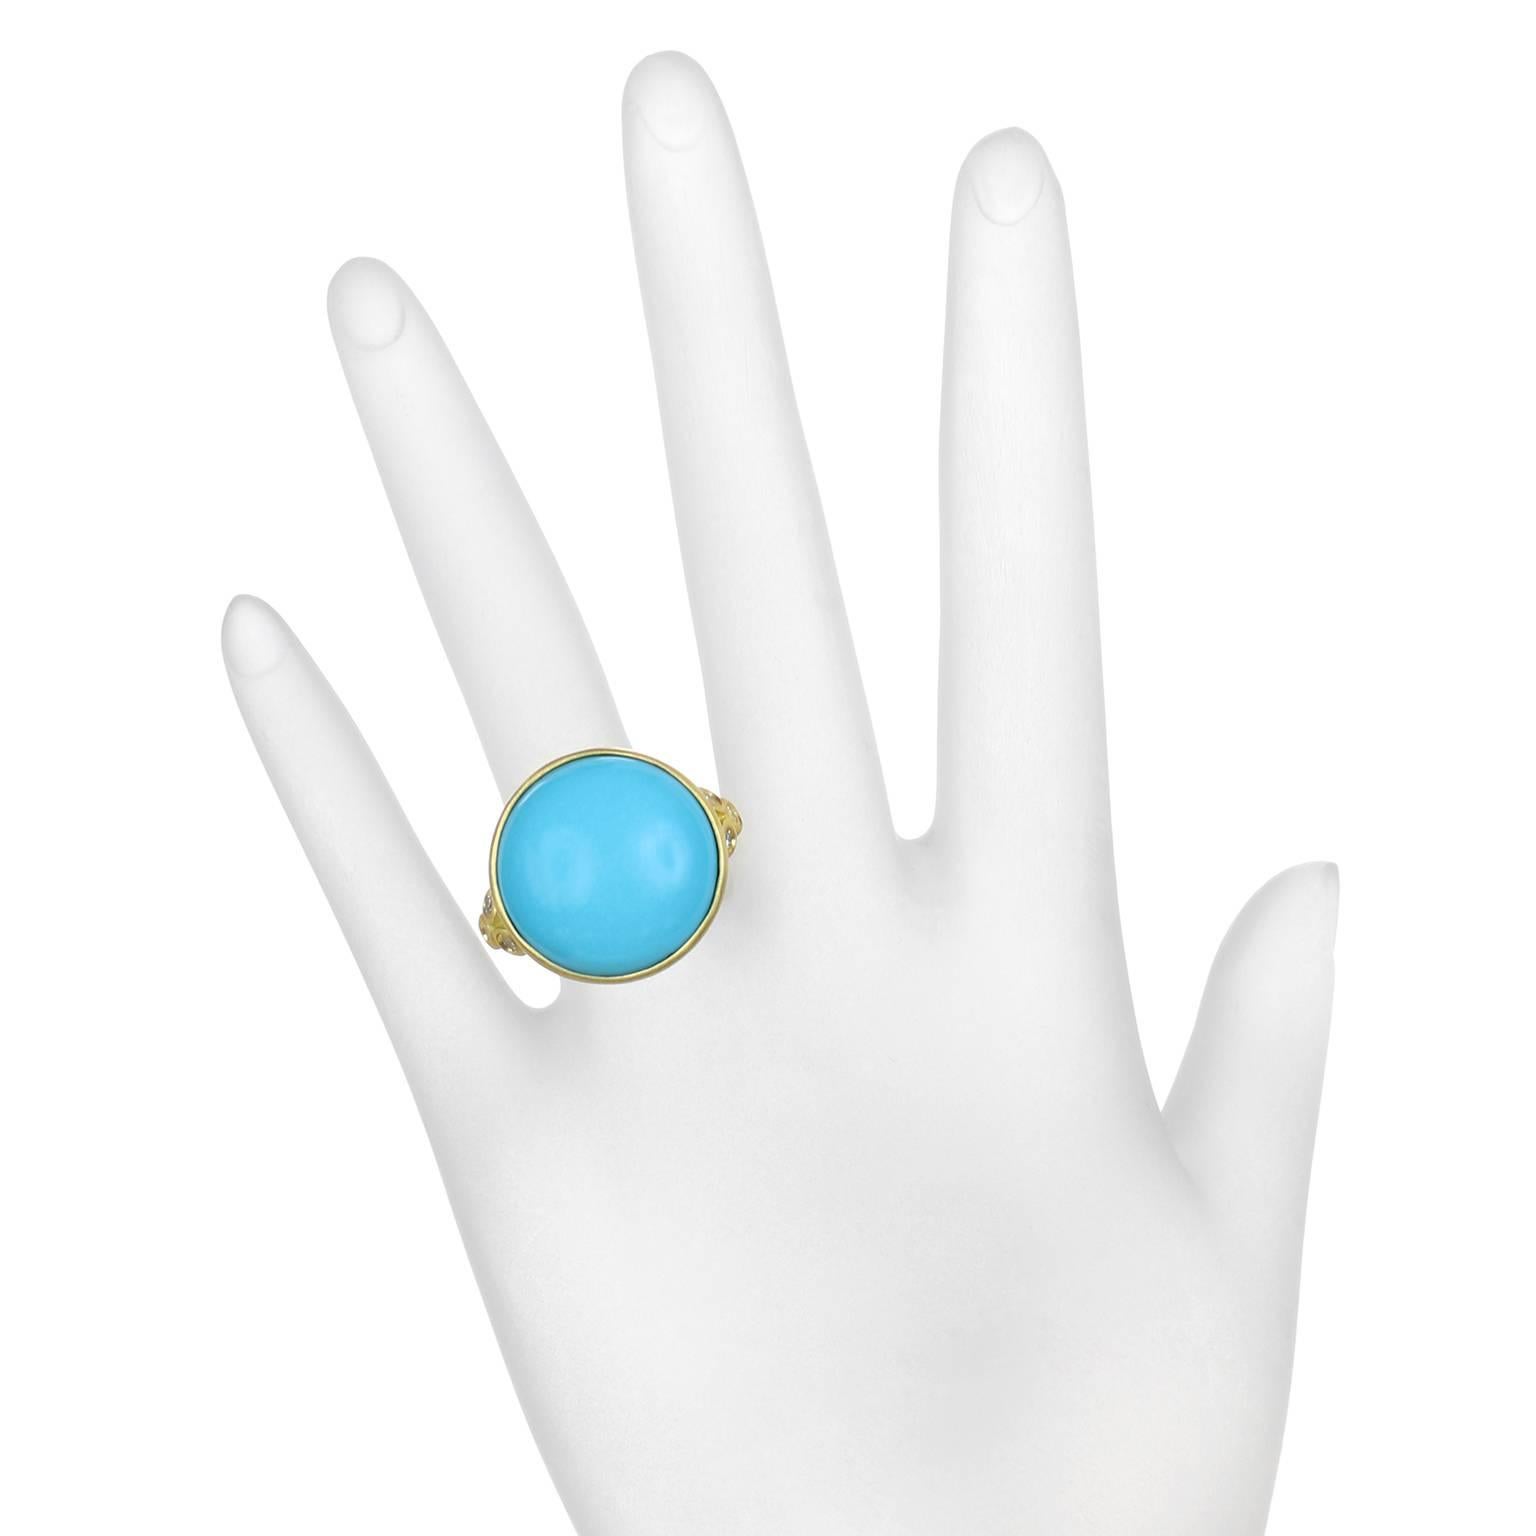 Contemporary Faye Kim Gold Diamond and Turquoise Bezel Ring